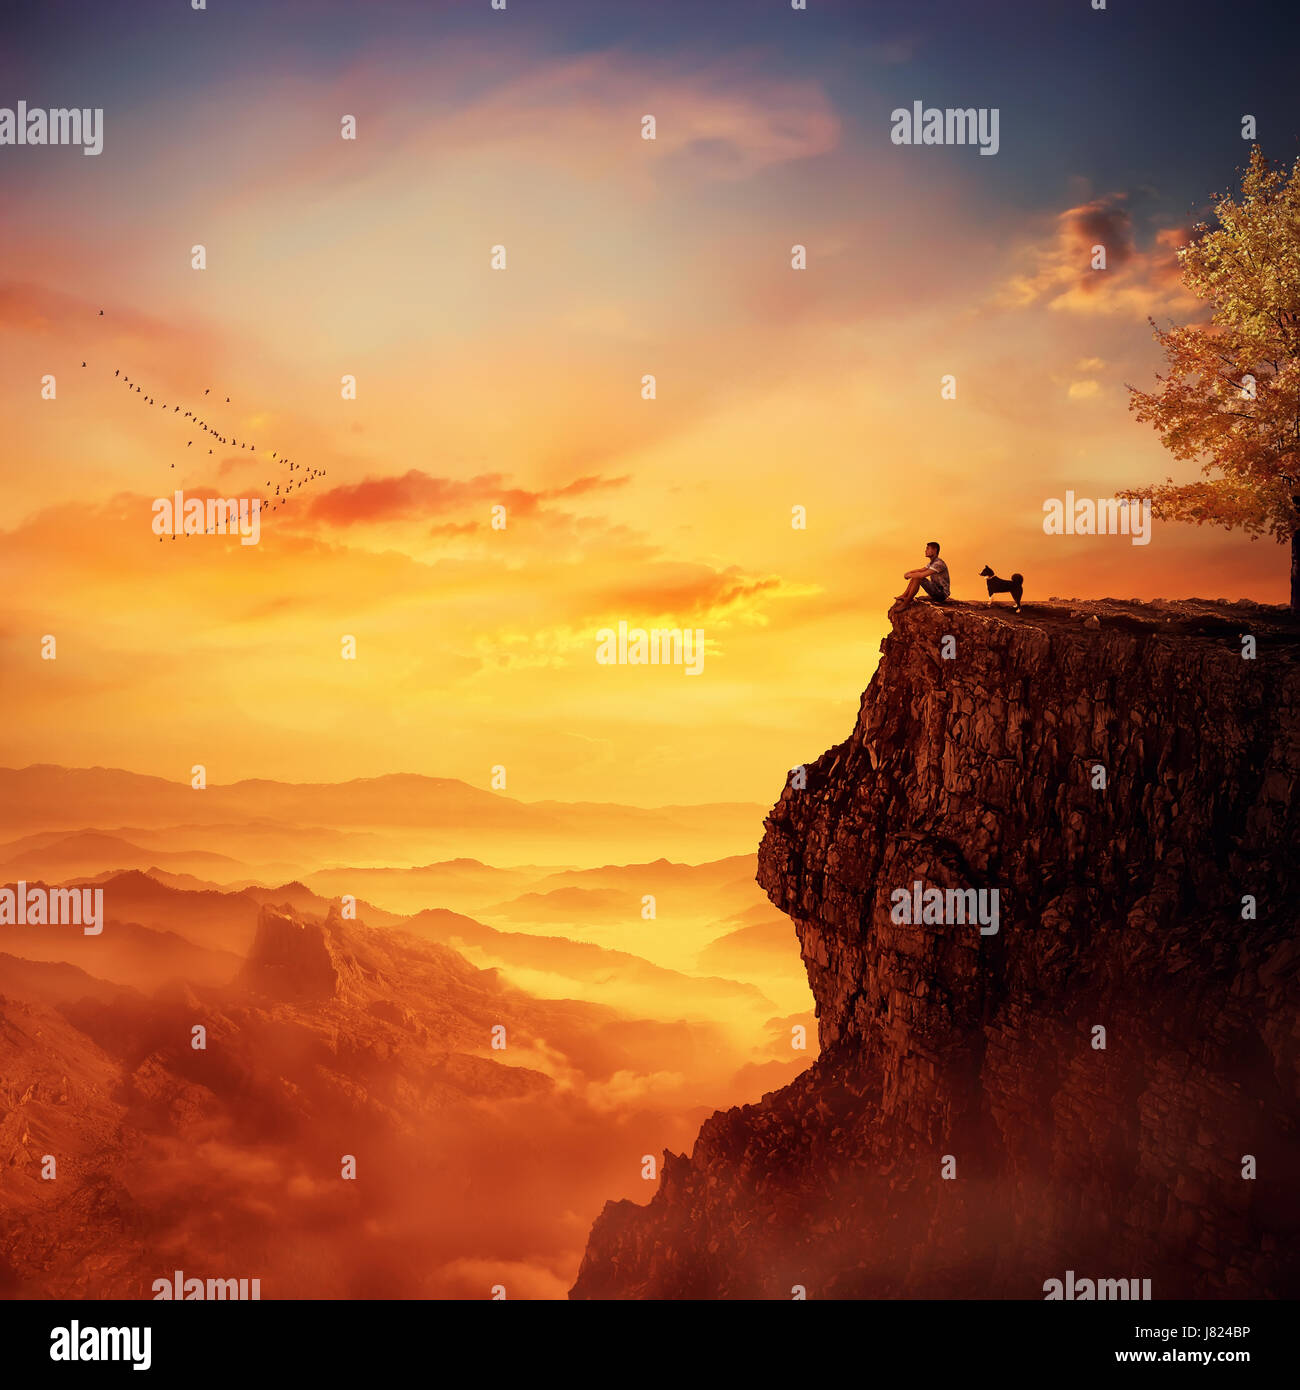 Young man with his faithful dog standing on the peak of a cliff watching the sunset over valley. Recalling childhood memories, friendship between huma Stock Photo